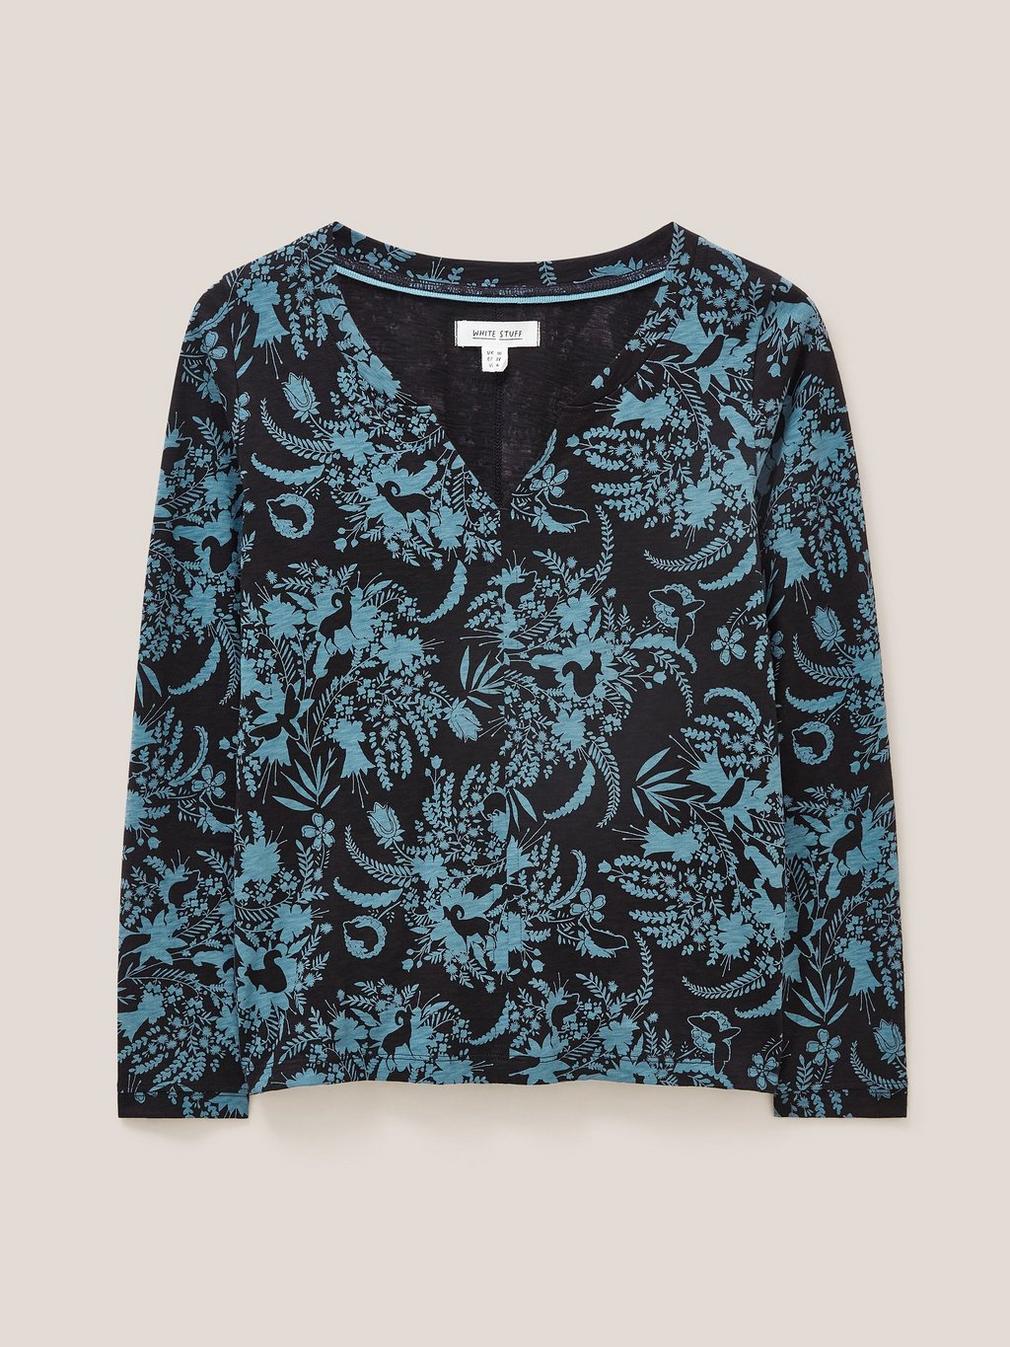 NELLY LS PRINT TEE in BLUE PR - FLAT FRONT